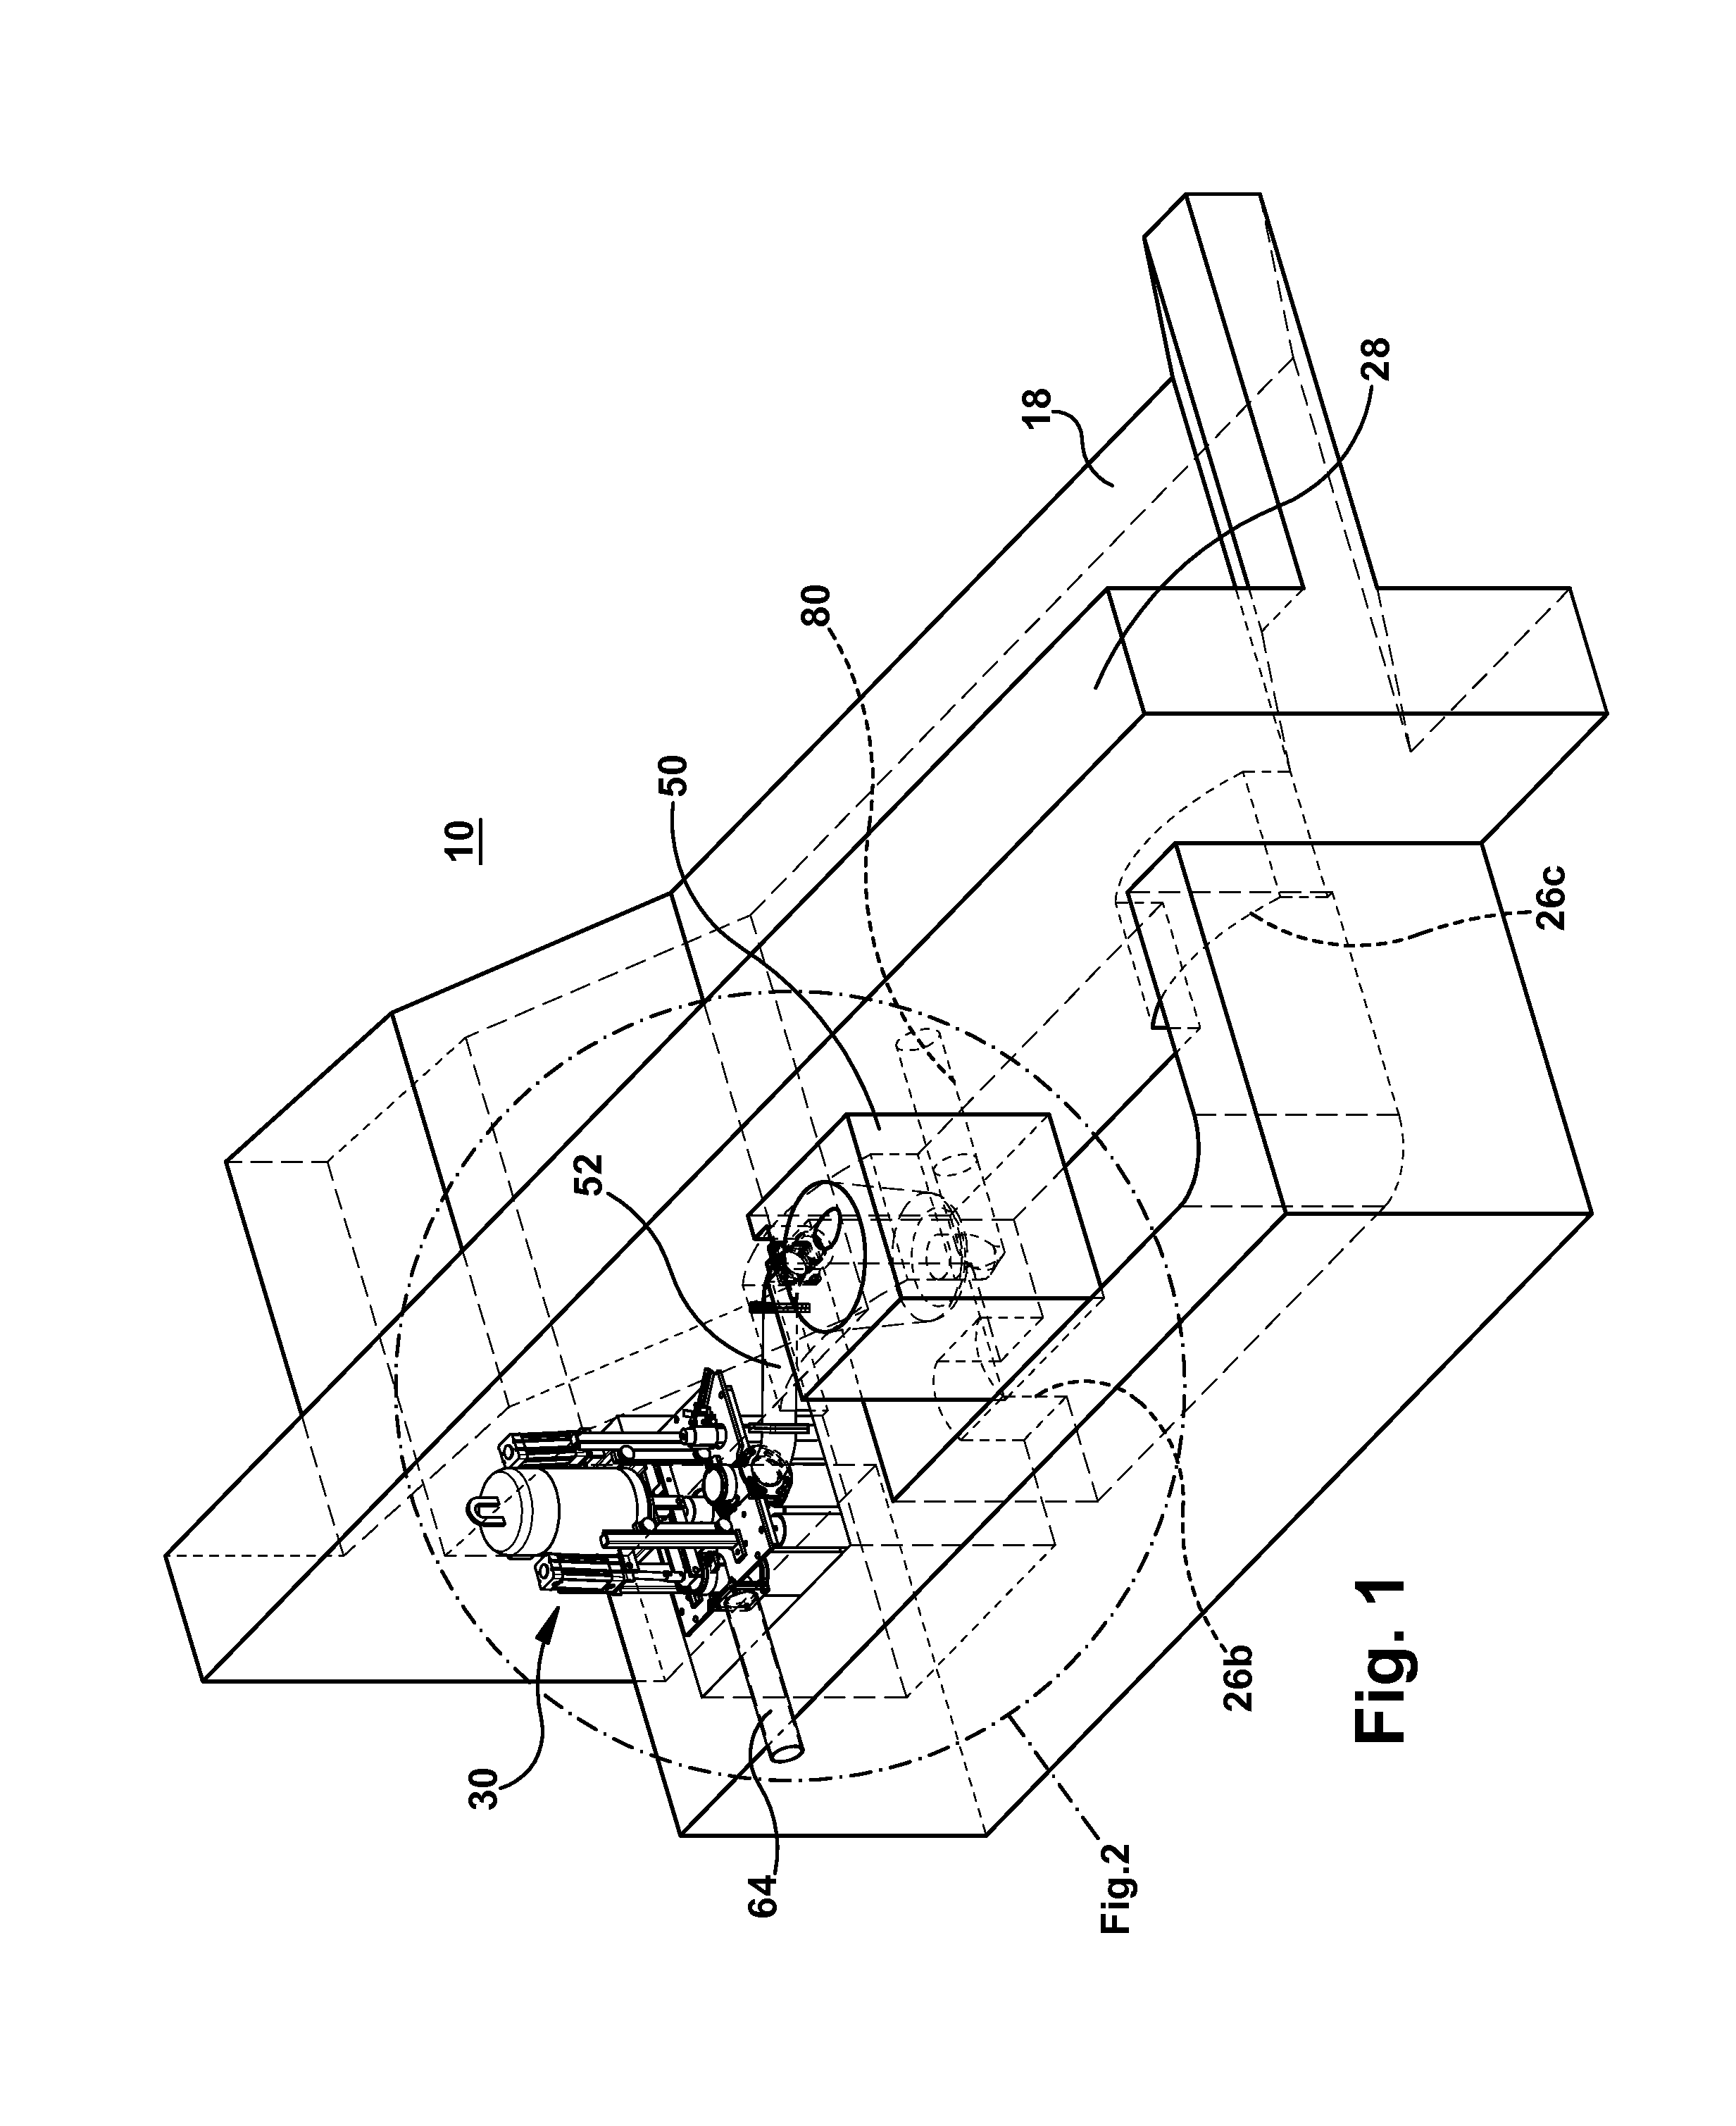 System and method for pumping molten metal and melting metal scrap